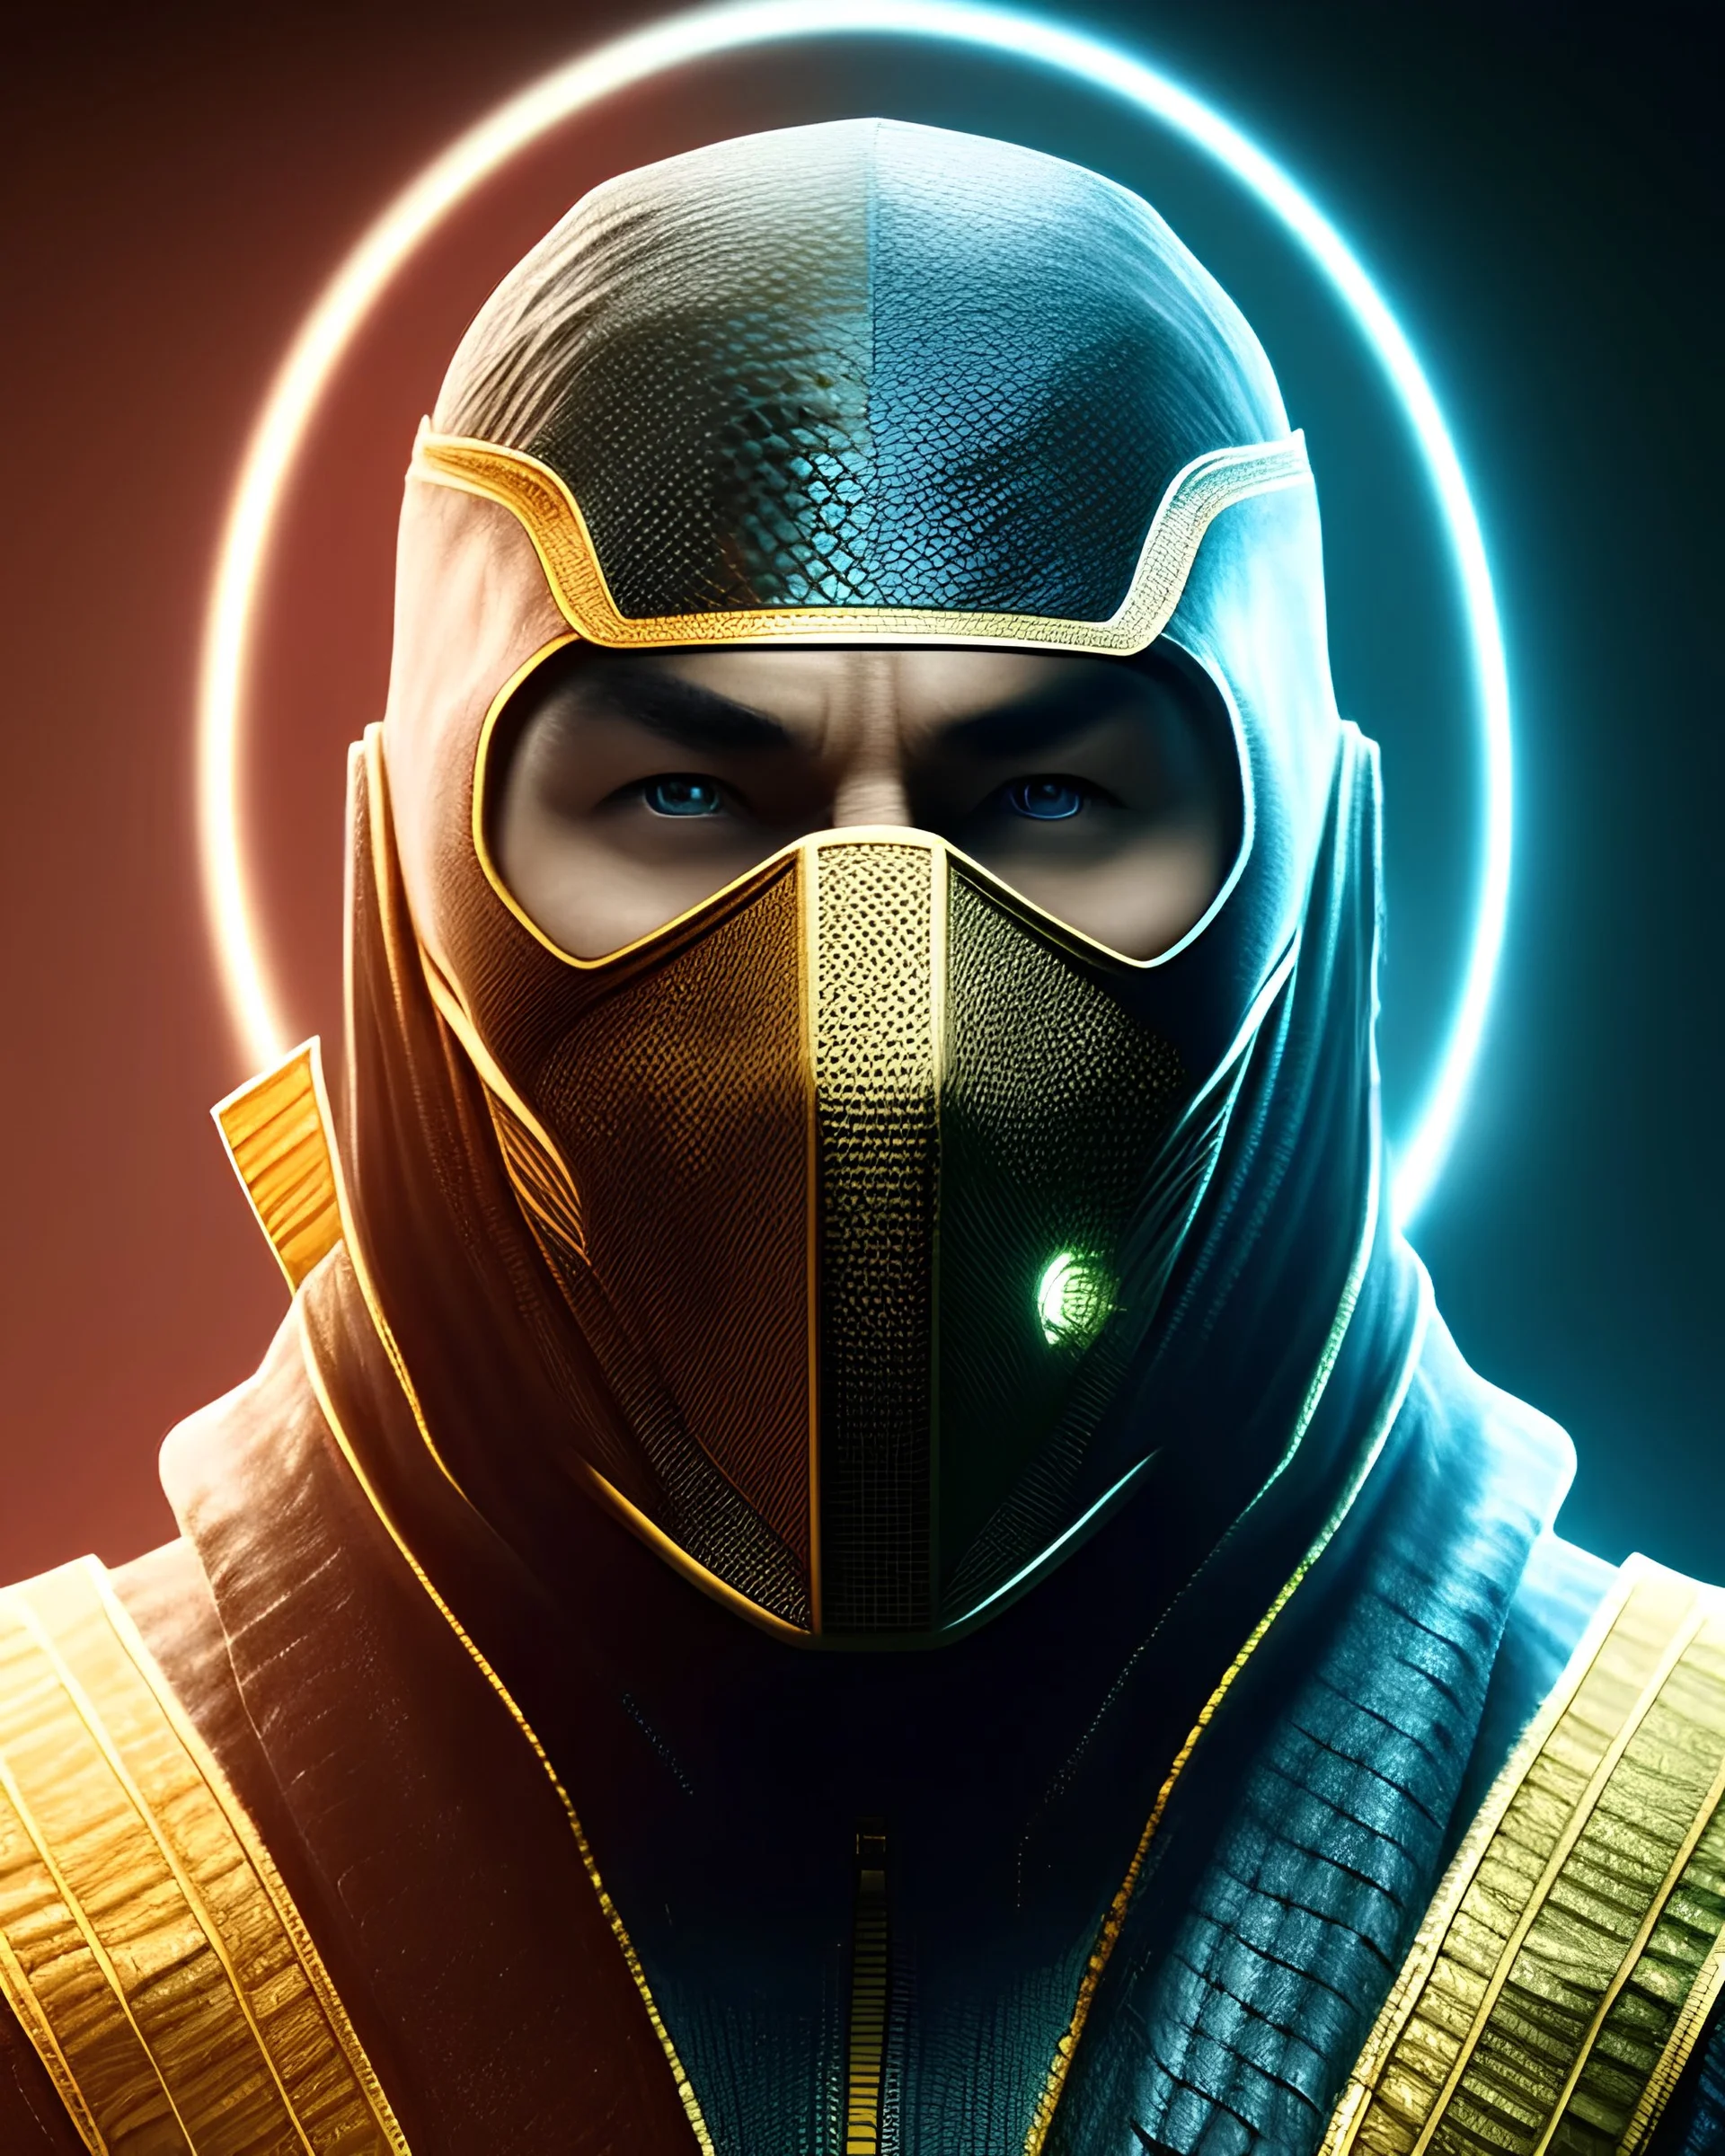 reptile, mask cover whole face and hood , mortal kombat 11, highly detailed, hyper-detailed, beautifully color-coded, insane details, intricate details, beautifully color graded, Cinematic, Color Grading, Editorial Photography, Depth of Field, DOF, Tilt Blur, White Balance, 32k, Super-Resolution, Megapixel, ProPhoto RGB, VR, Half rear Lighting, Backlight, non photorealistic rendering